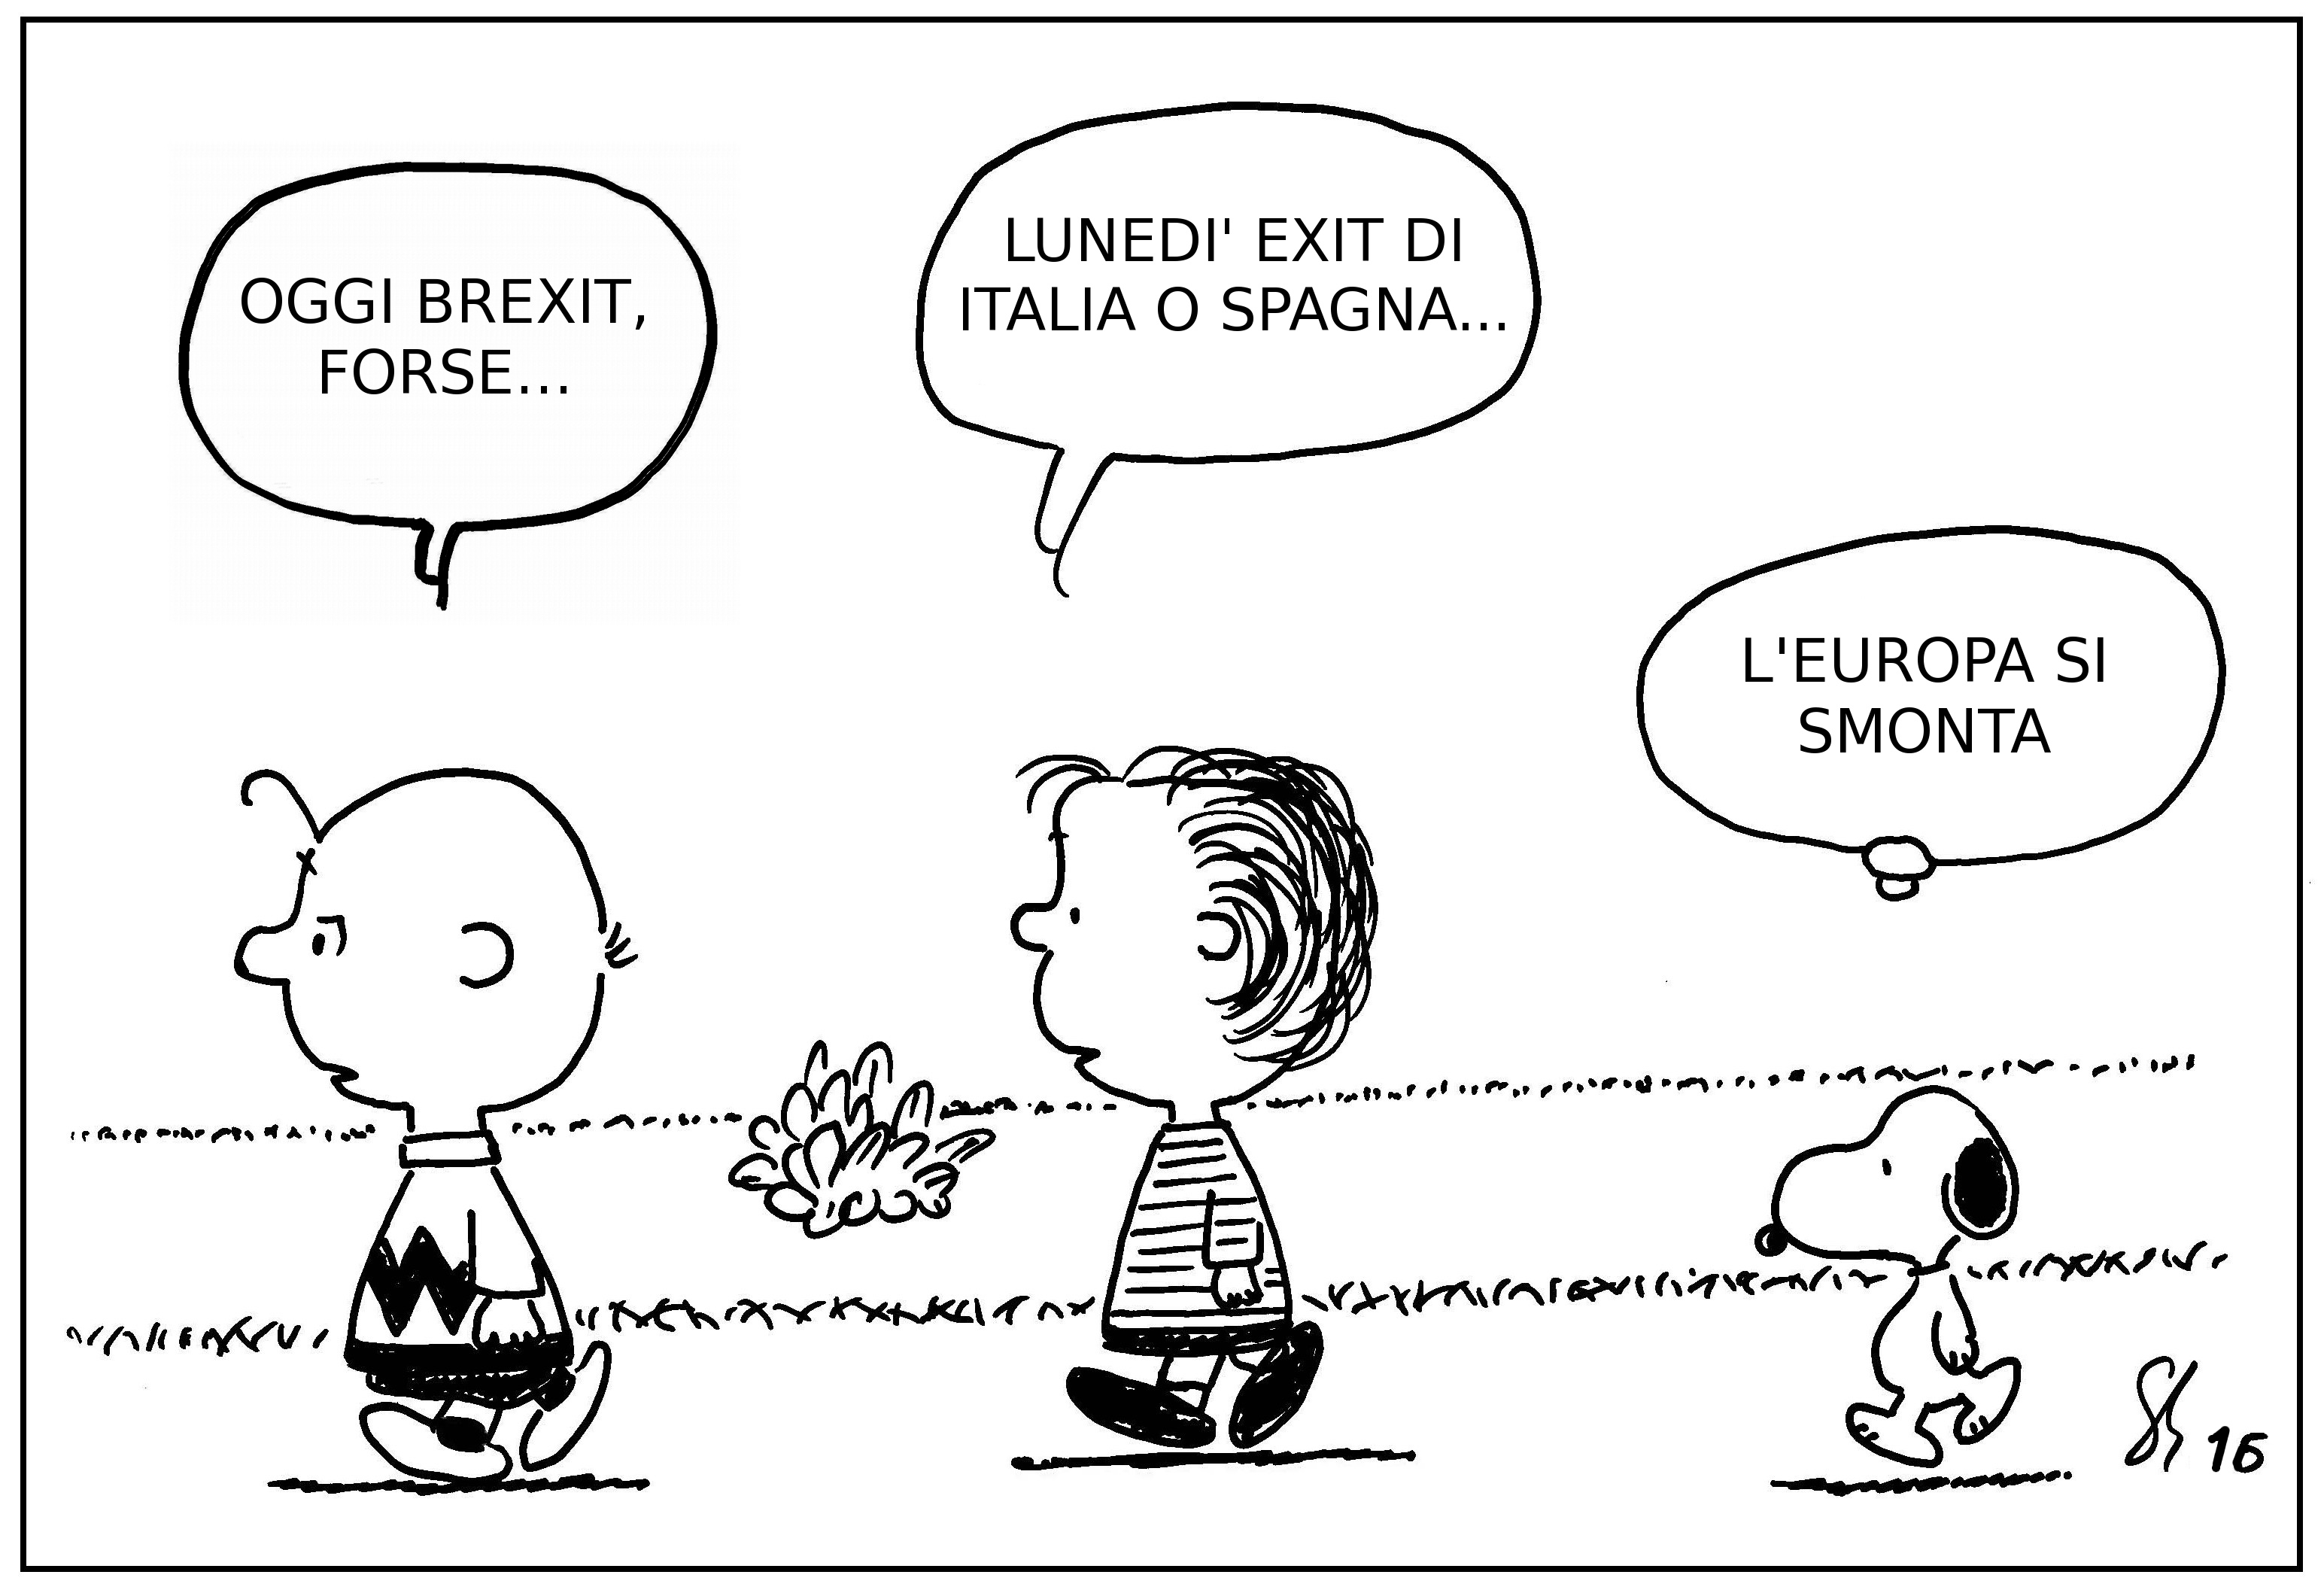 Picture Credit: Peanuts Reloaded || Perhaps today Brexit; Monday an exit from Italy or Spain; [then] Europe dismantles